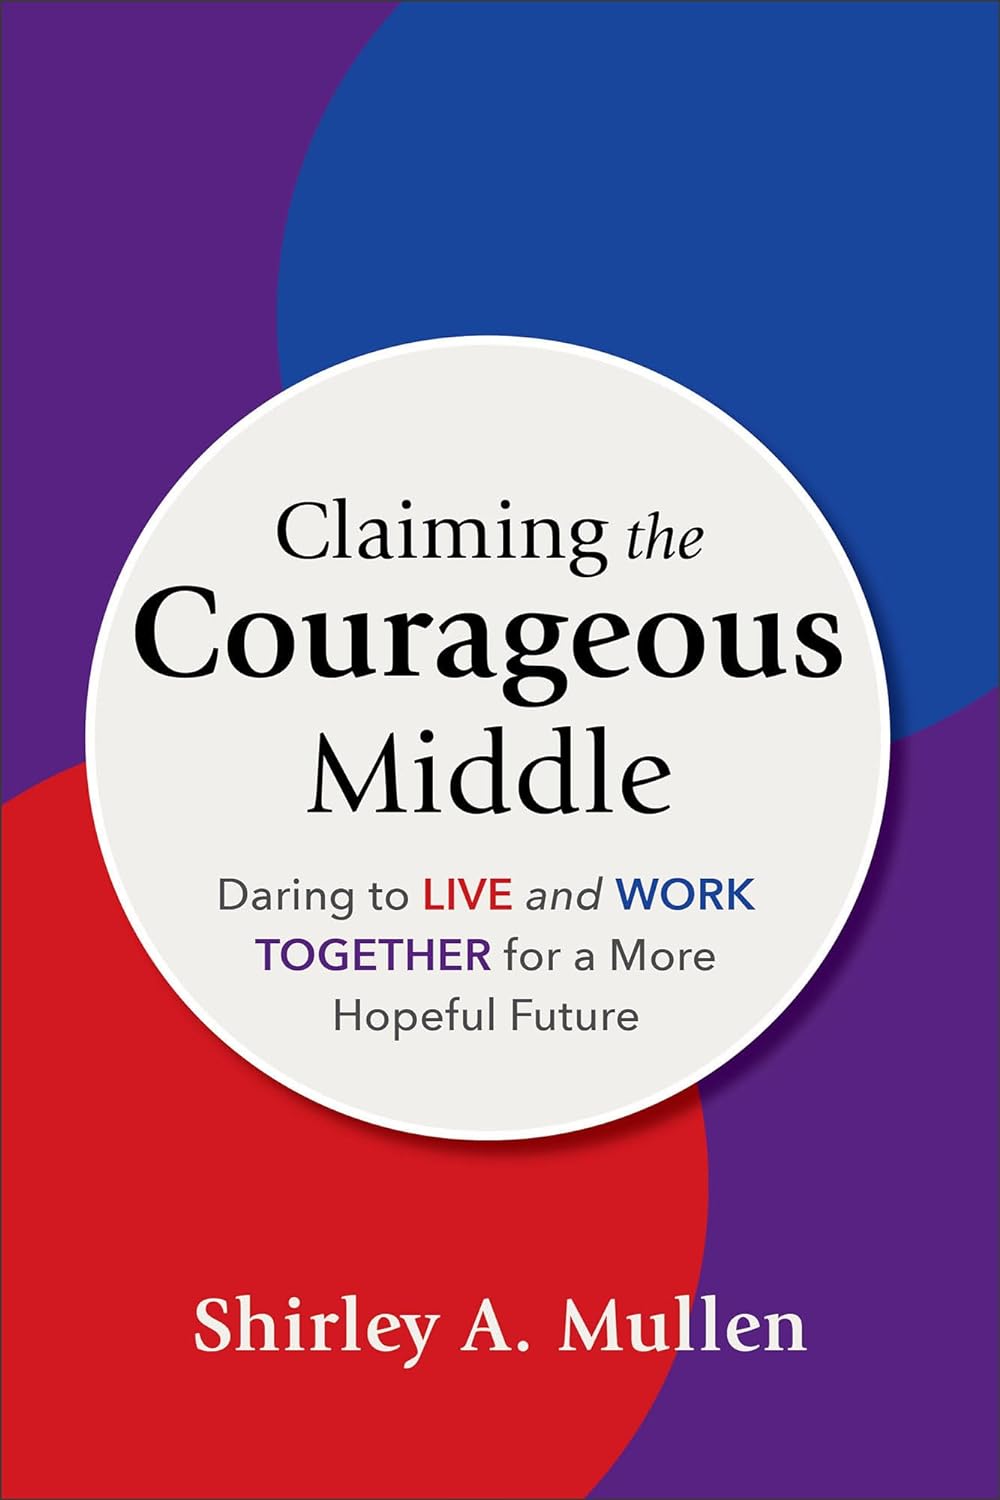 Daring to Teach in the Courageous Middle: A Testimonial Book Review